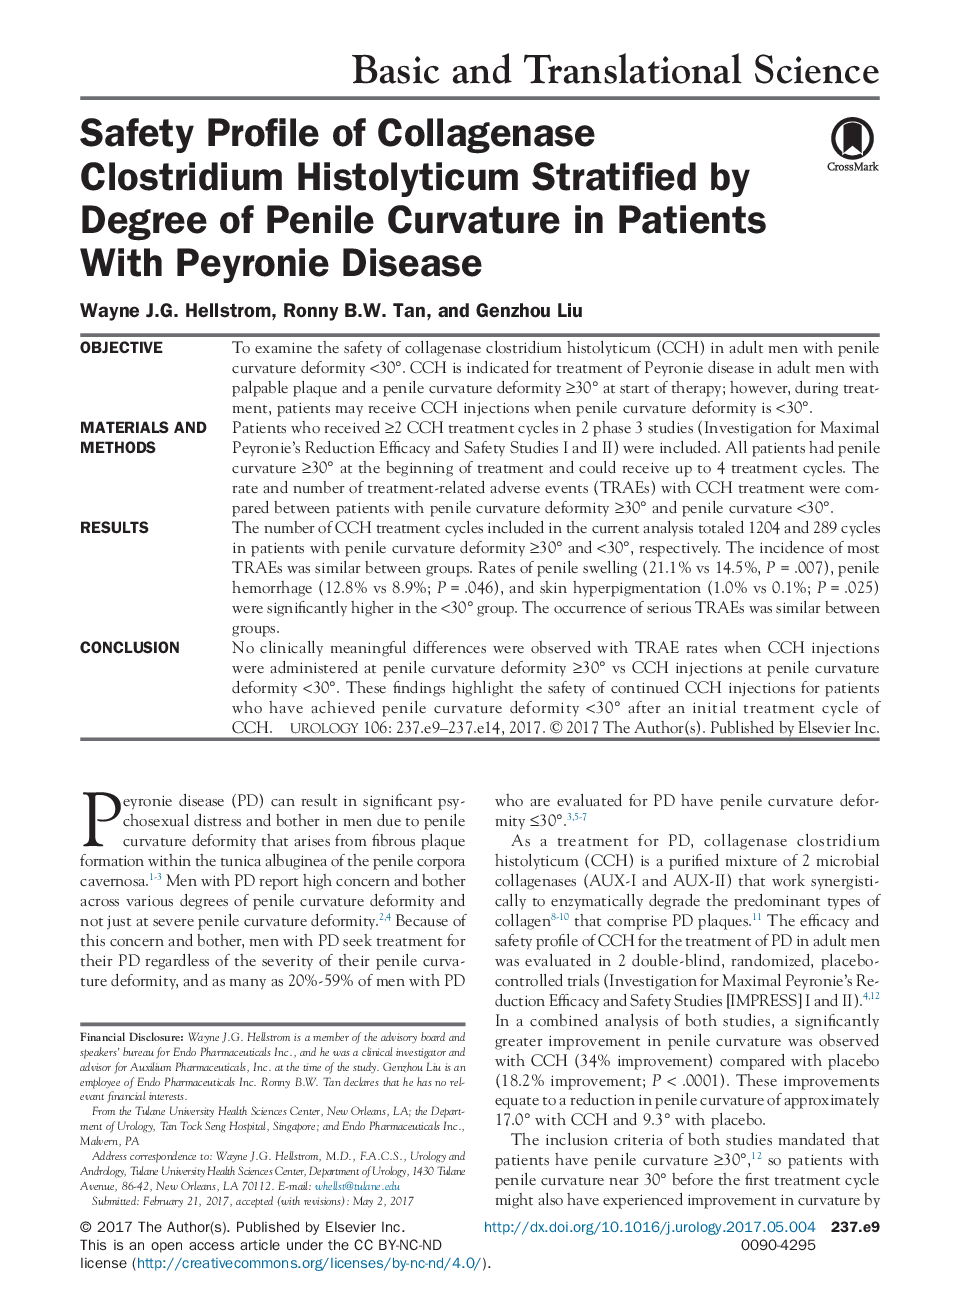 Safety Profile of Collagenase Clostridium Histolyticum Stratified by Degree of Penile Curvature in Patients With Peyronie Disease